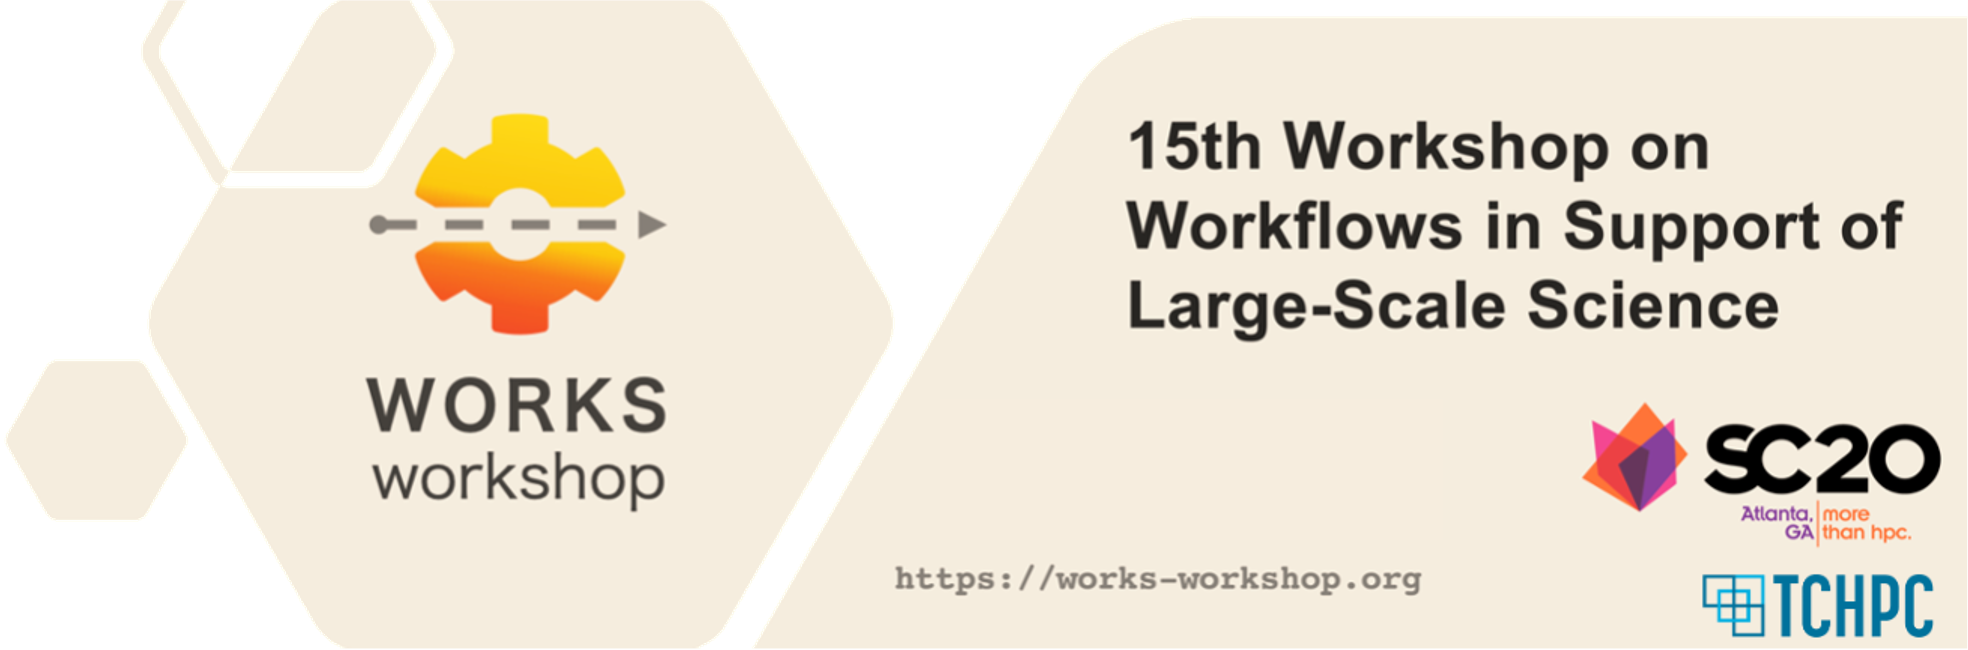 Proceedings of the 15th Workflows in Support of Large-Scale Science – WORKS 2020